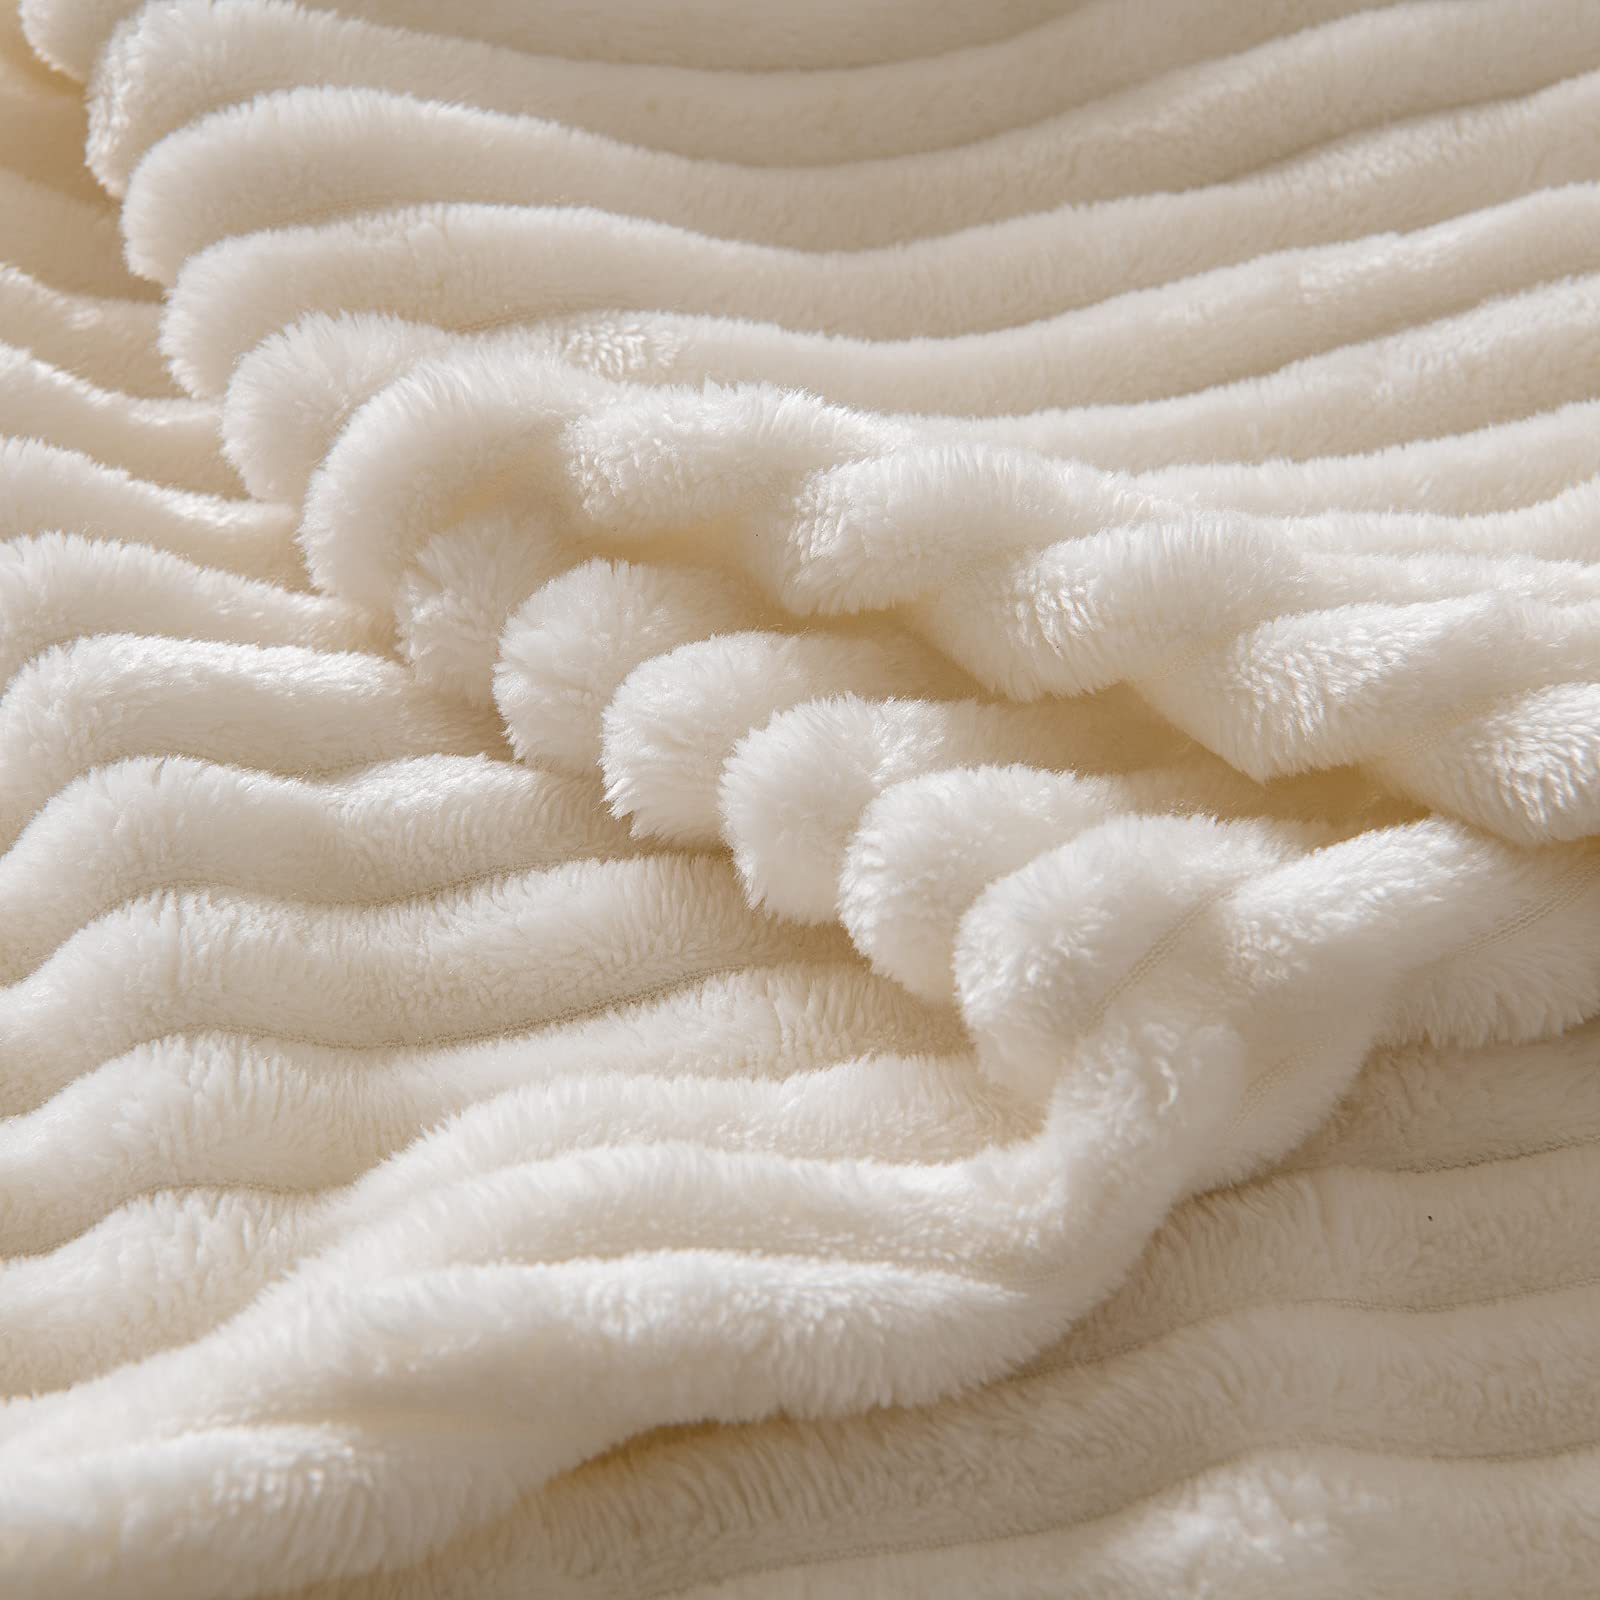 MIULEE Cream White Throw Blanket 3D Ribbed Jacquard Fleece Flannel Velvet Plush Decorative Bed Blanket (Throw, 50" x 60") - Super Soft, Lightweight, Warm and Cozy for Couch Sofa